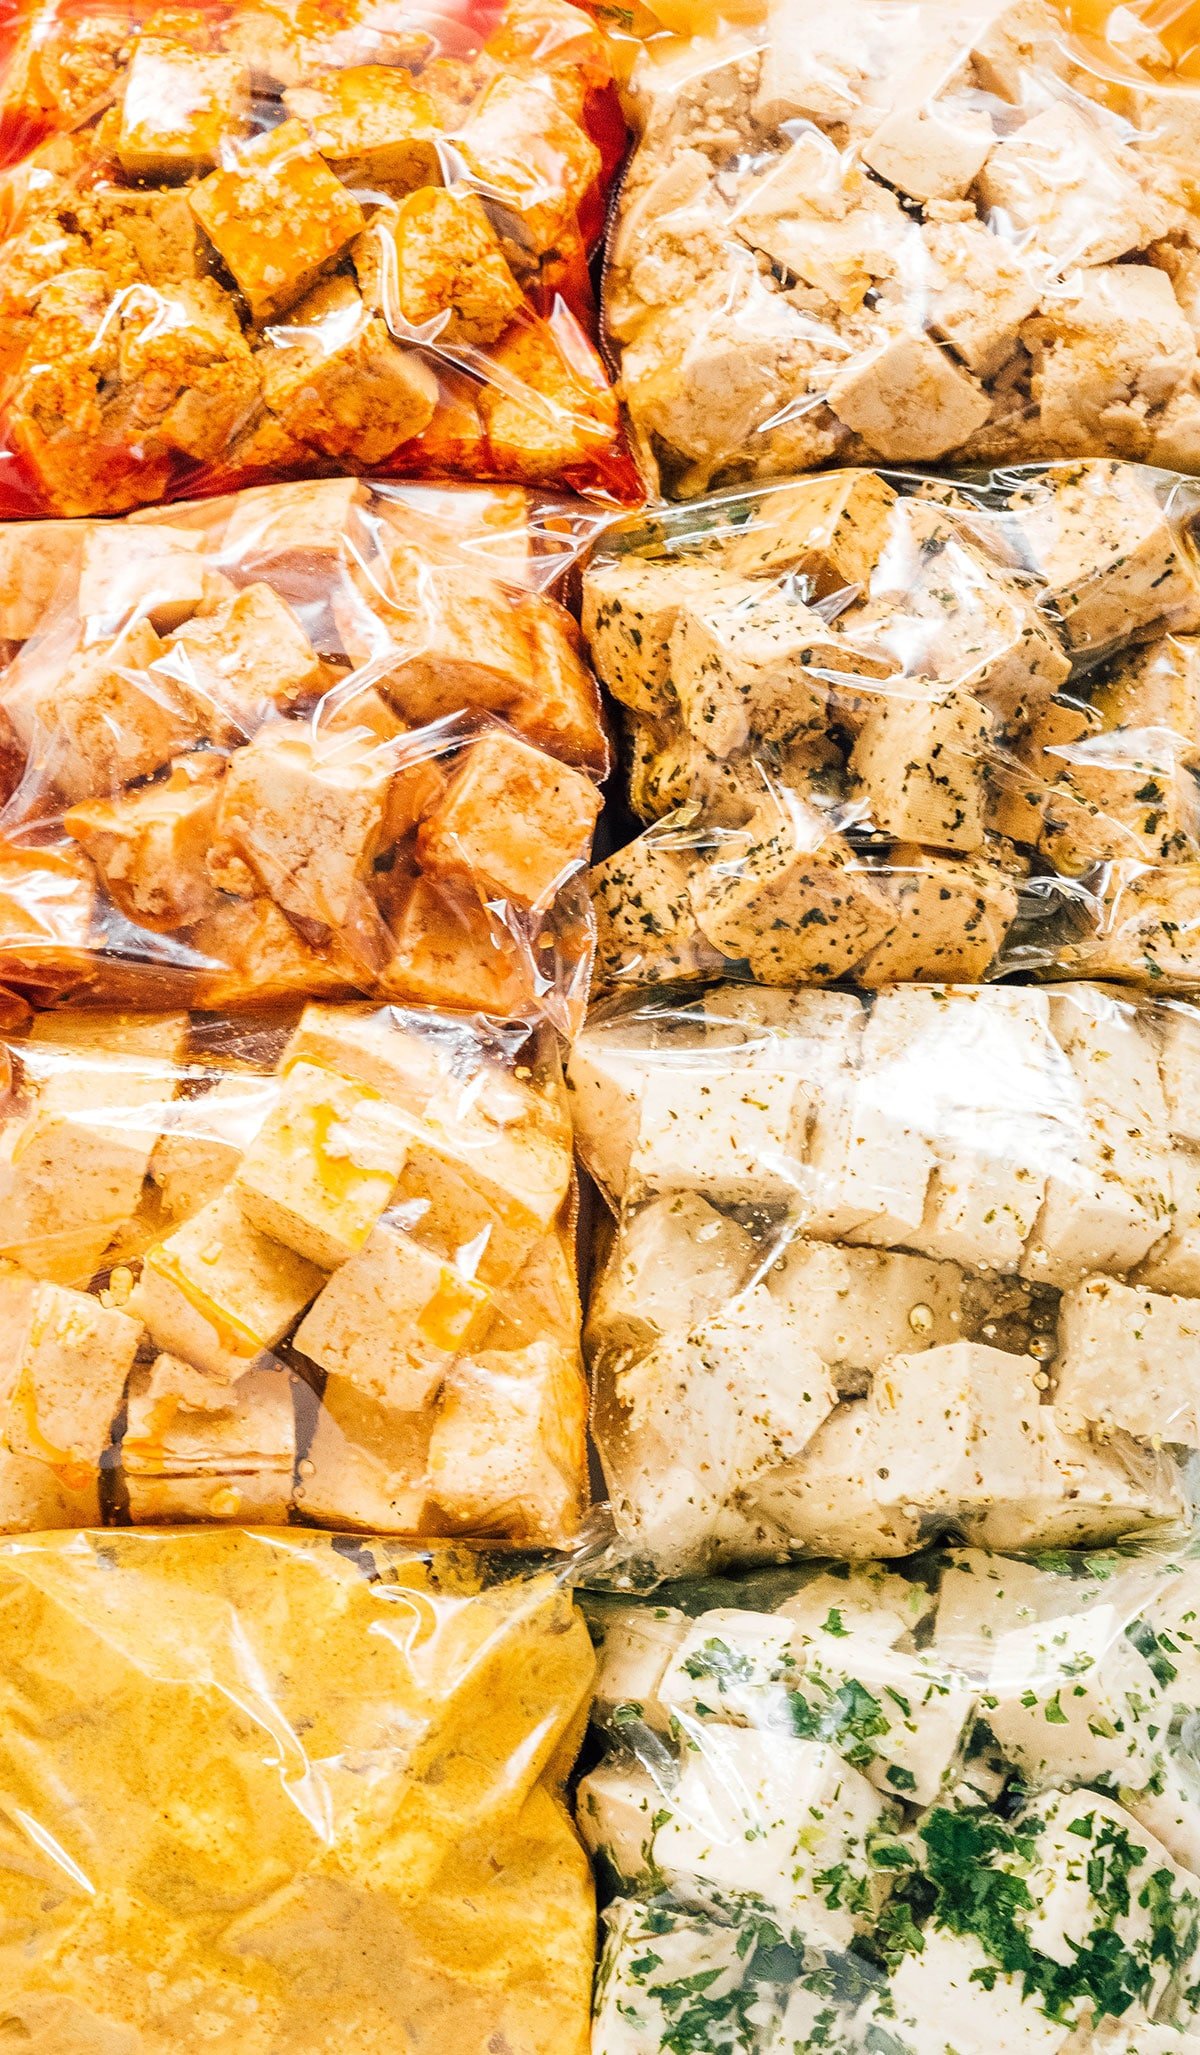 8 bags of tofu cubes in various colorful marinades.